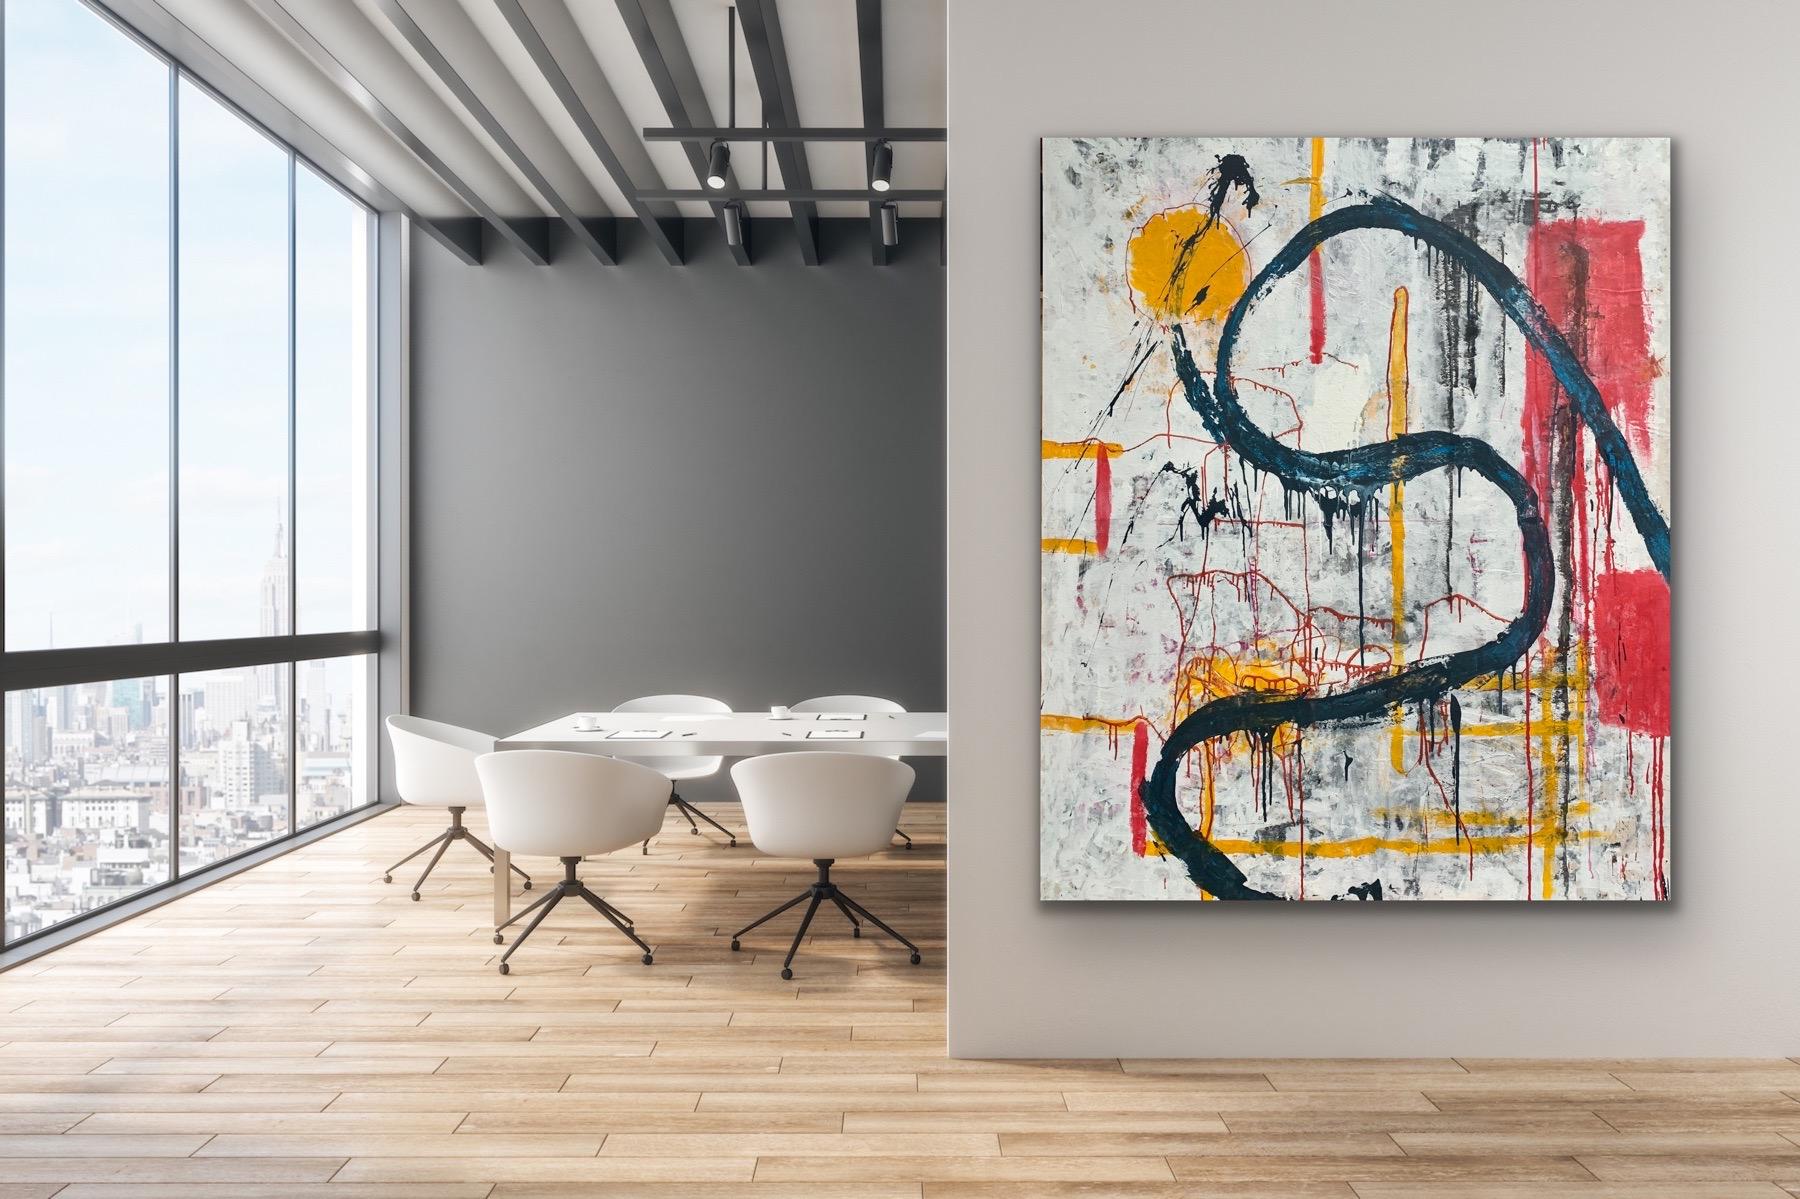 AUTUMN - large black, yellow, and red abstract expressionist painting  - Painting by Silvia Poloto